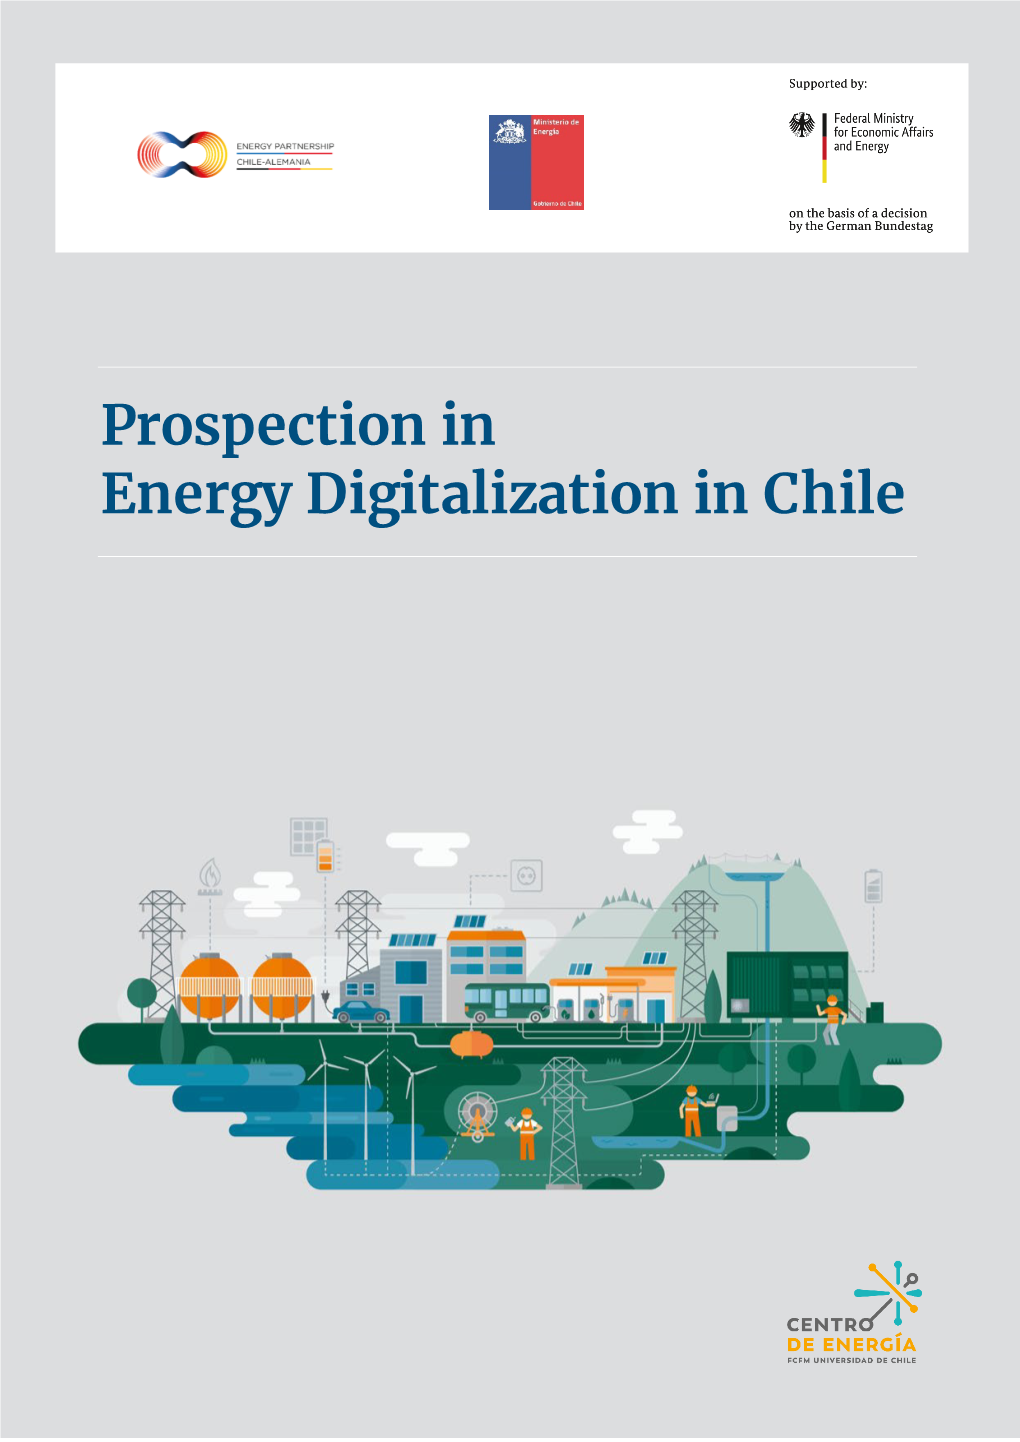 Prospection in Energy Digitalization in Chile